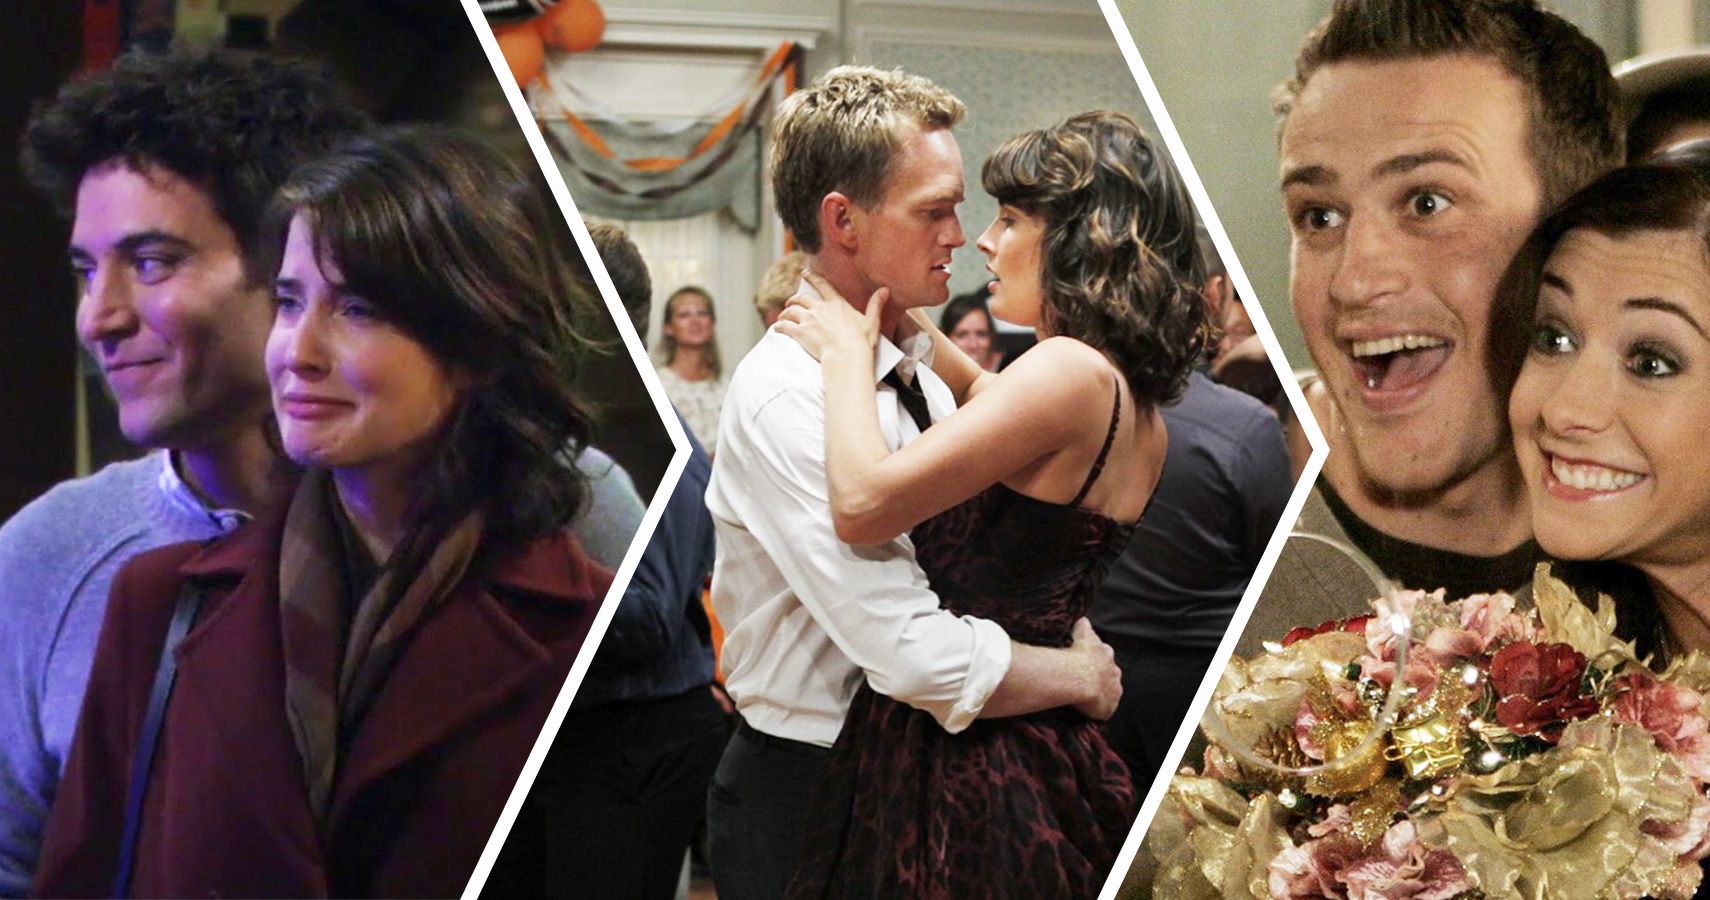 How I Met Your Mother 10 Major Relationships Ranked Least To Most Successful